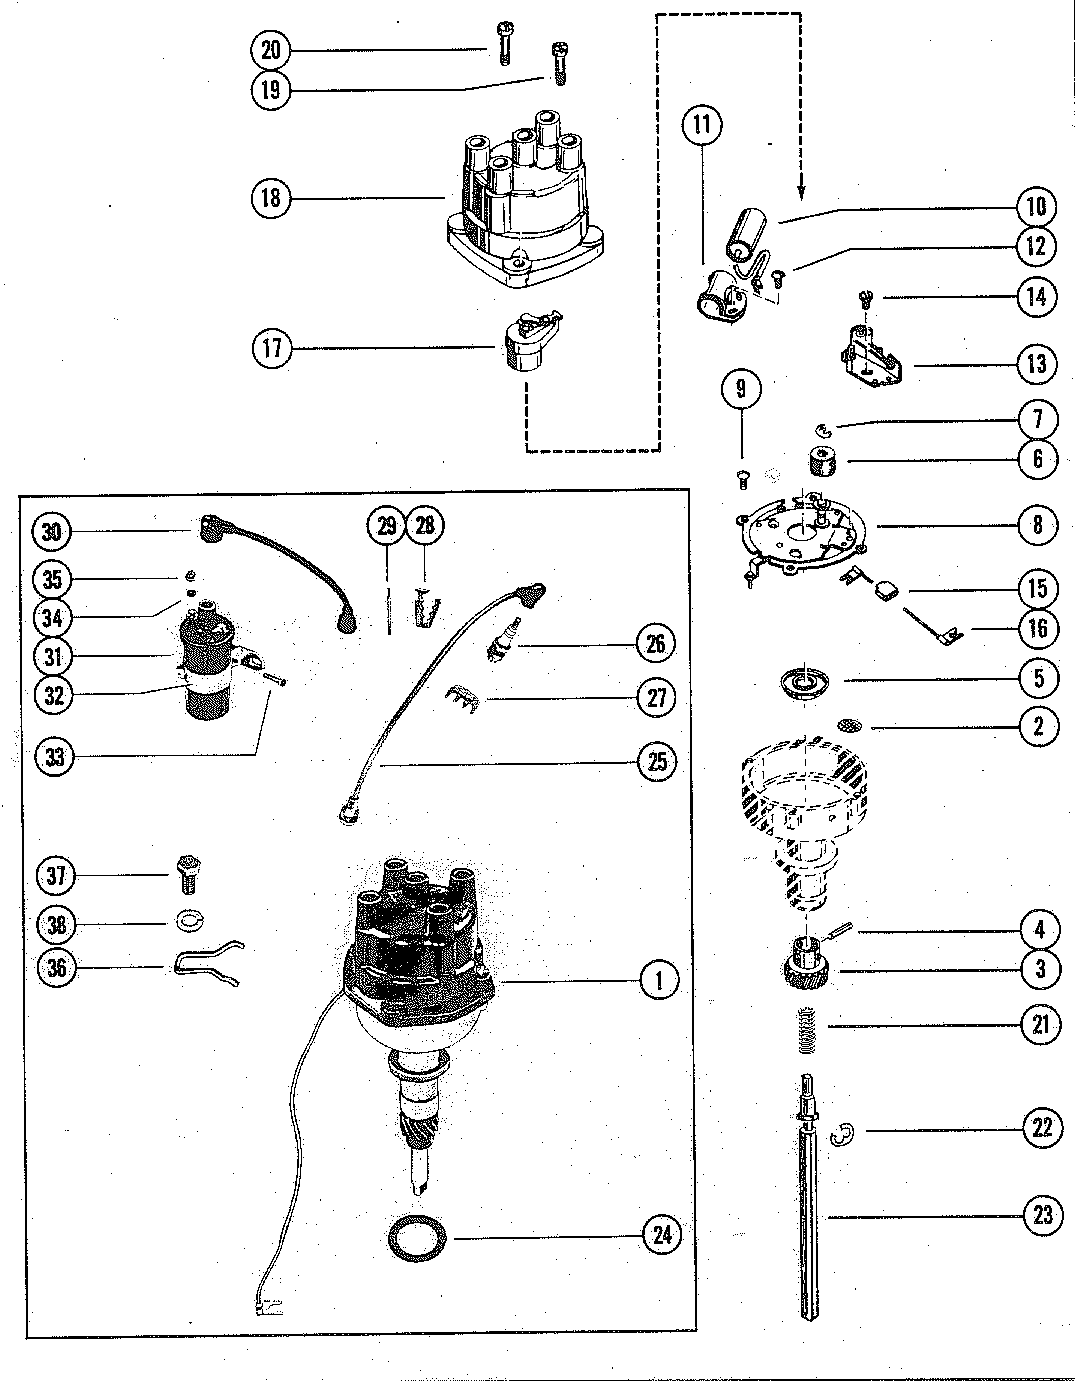 DISTRIBUTOR ASSEMBLY AND COIL